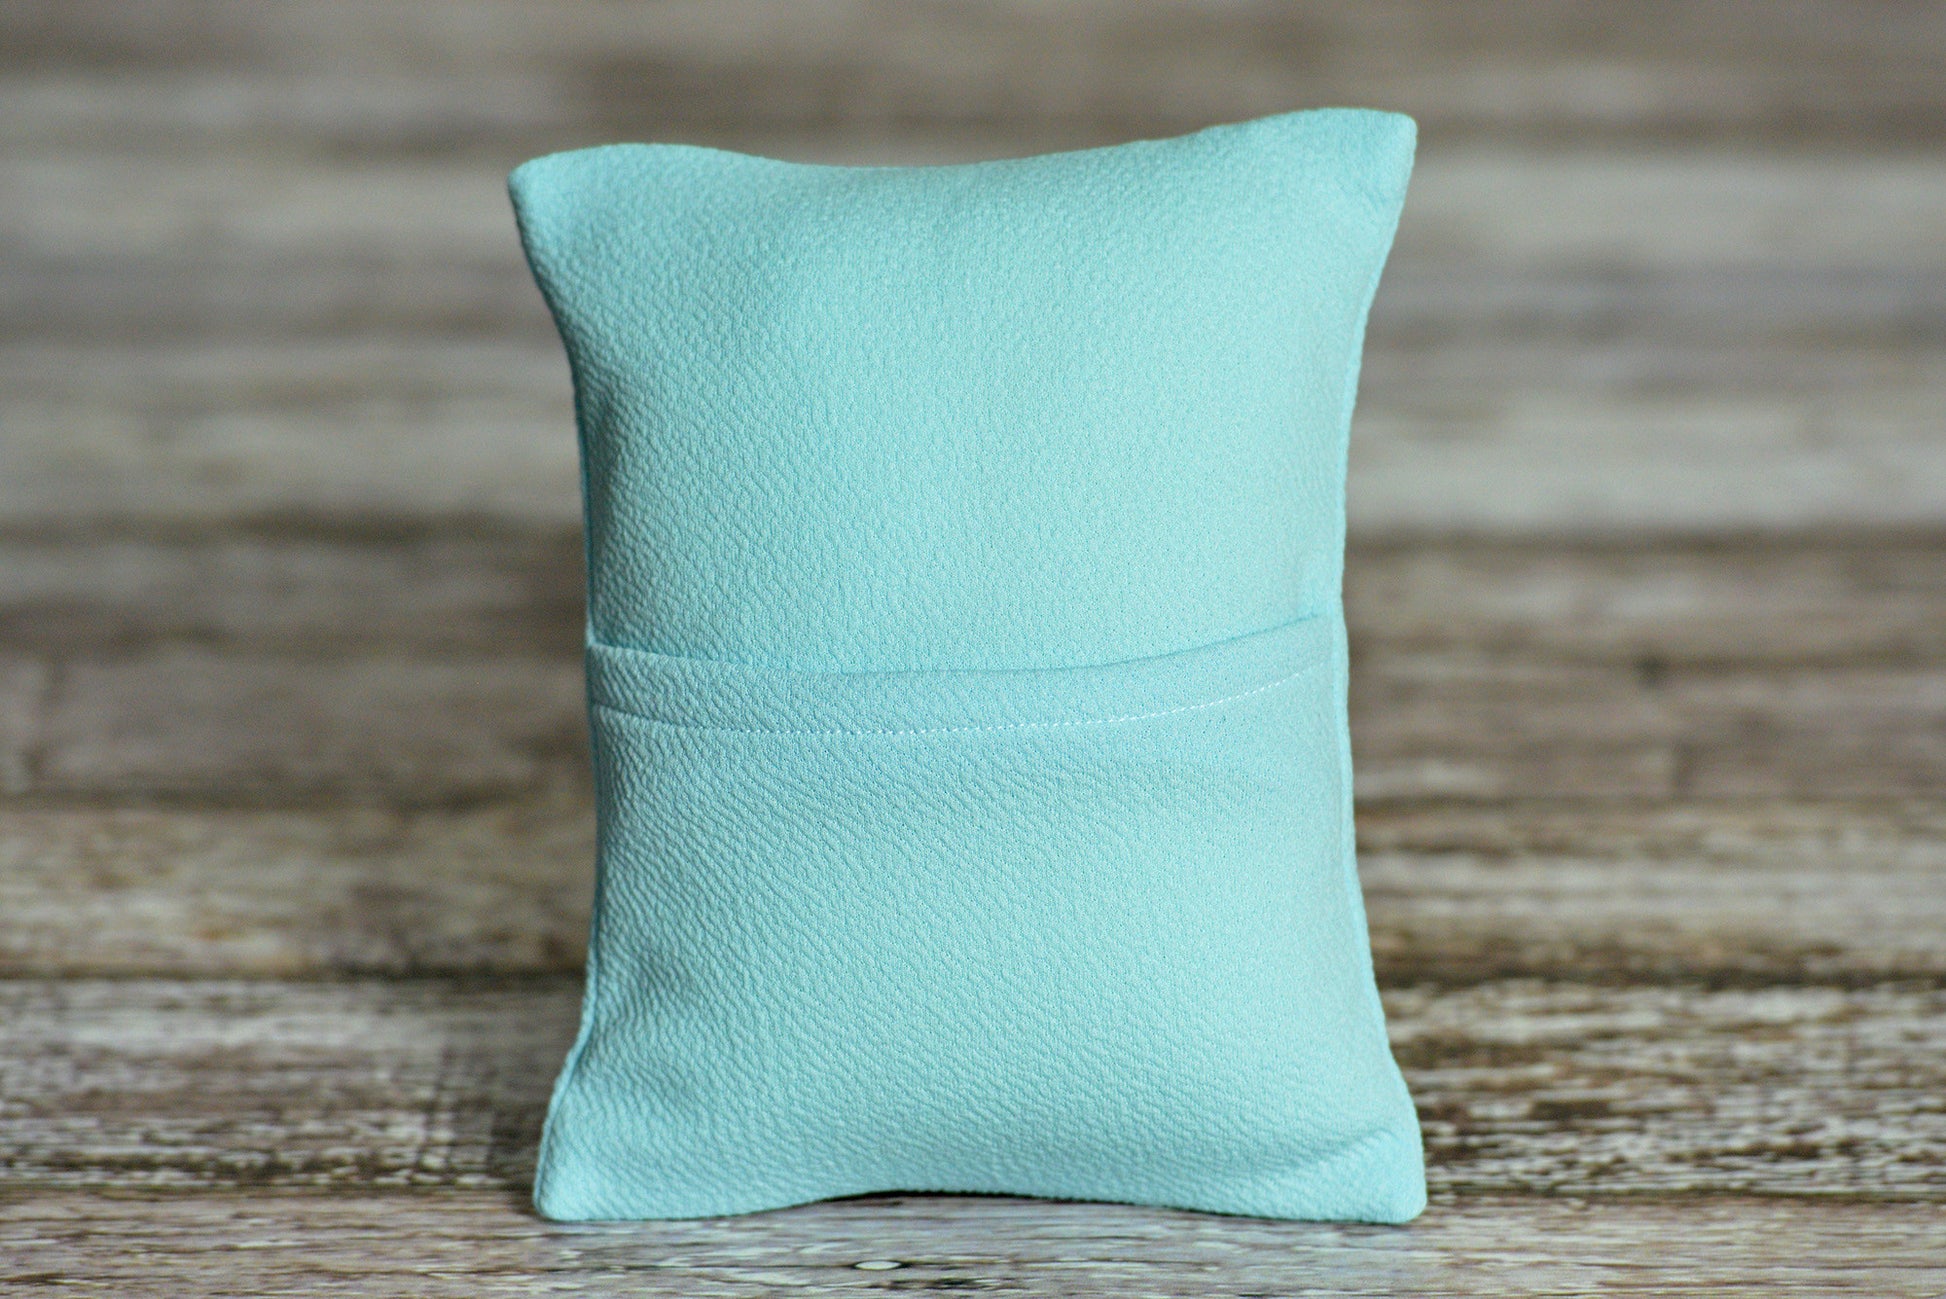 Mini Pillow with Cover - Textured - Light Blue-Newborn Photography Props